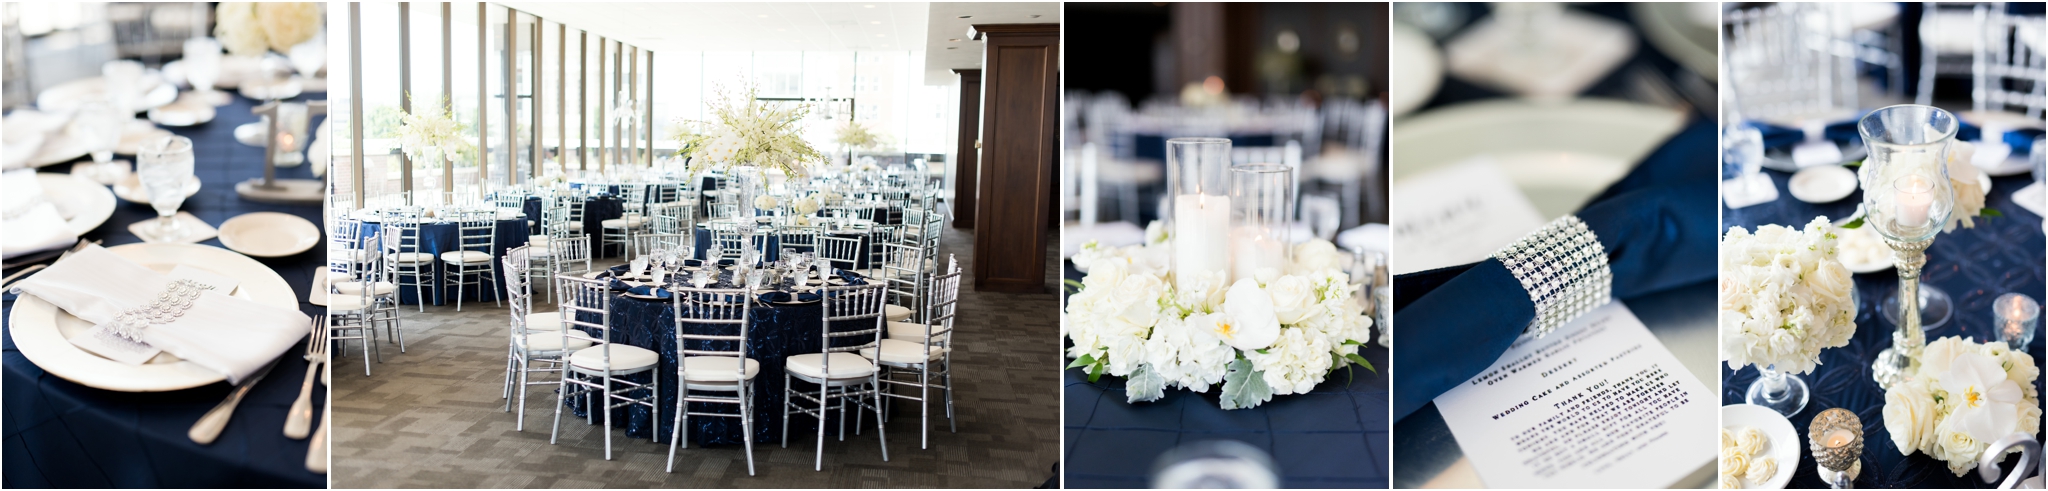 Regions Tower | Sarah and Rachel Wedding Photographers | Indianapolis, IN | Navy and White Reception Details